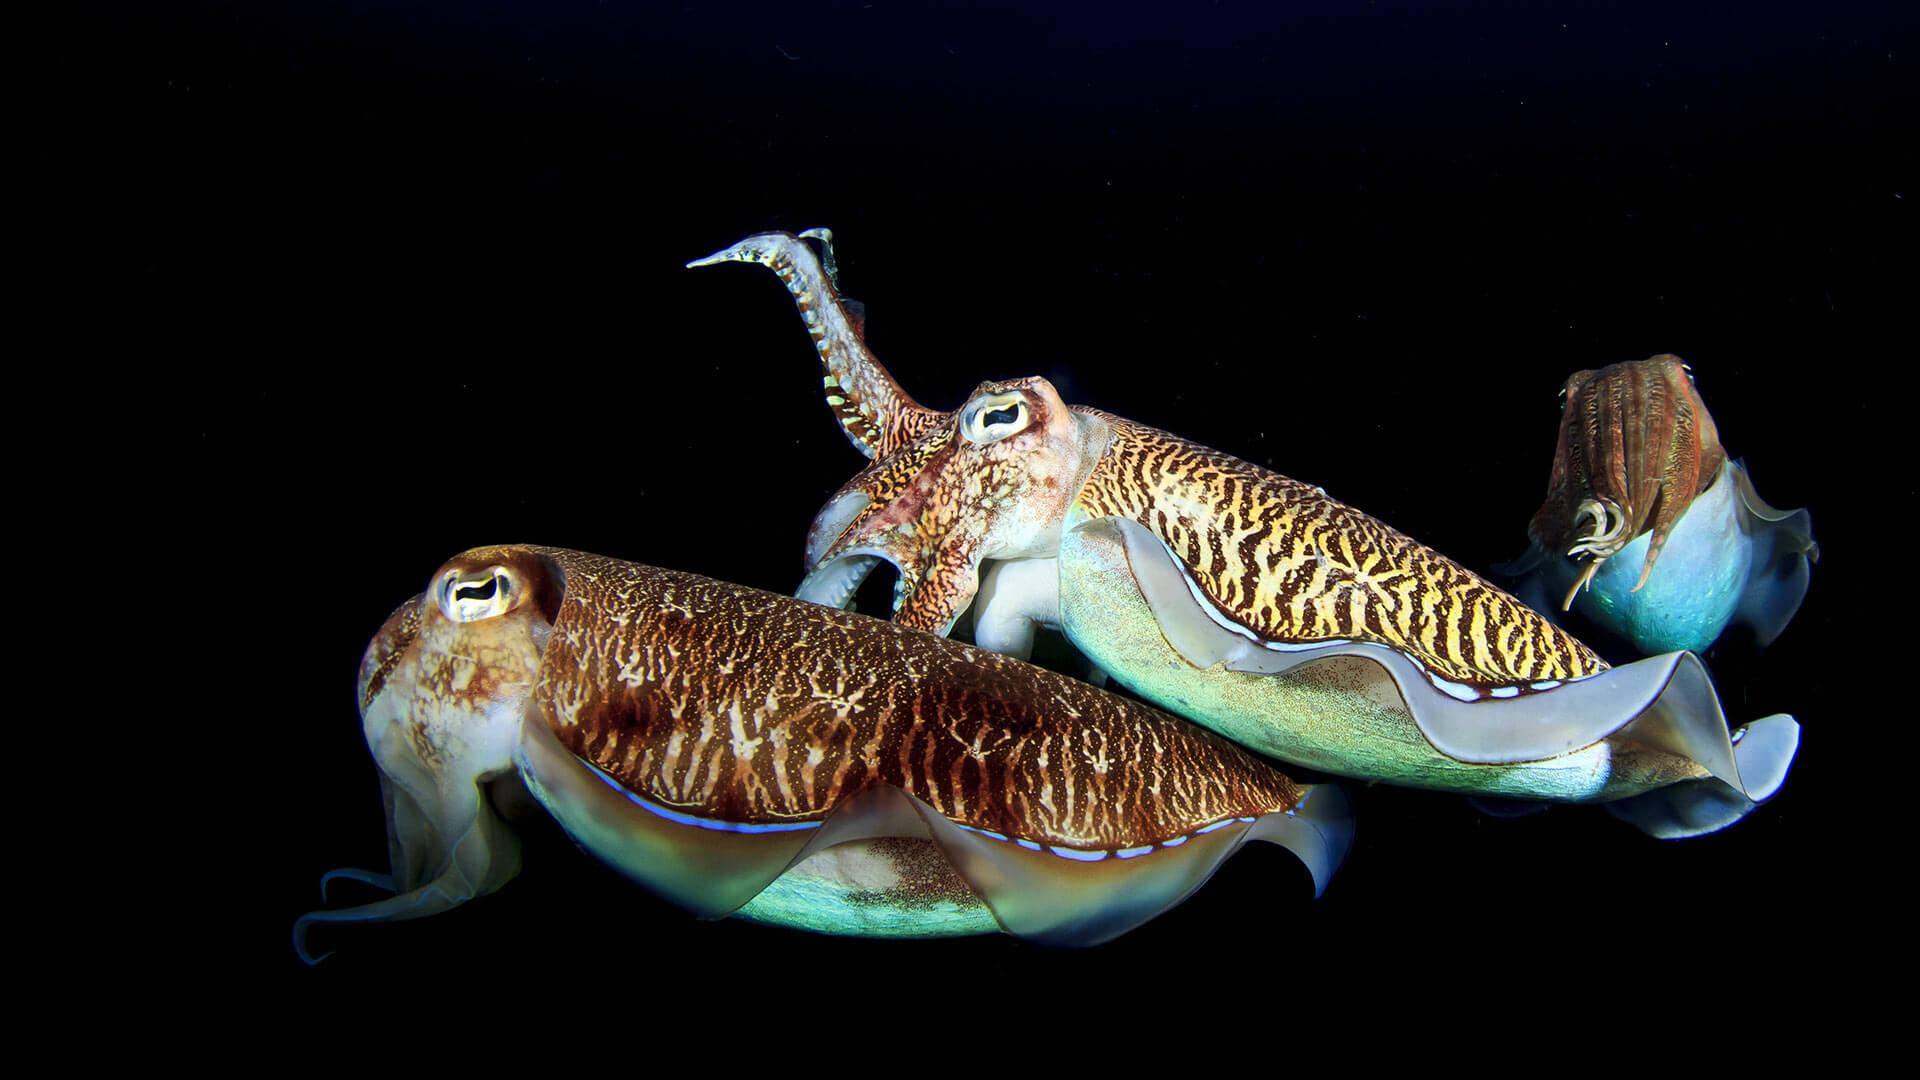 Octopus and Cuttlefish